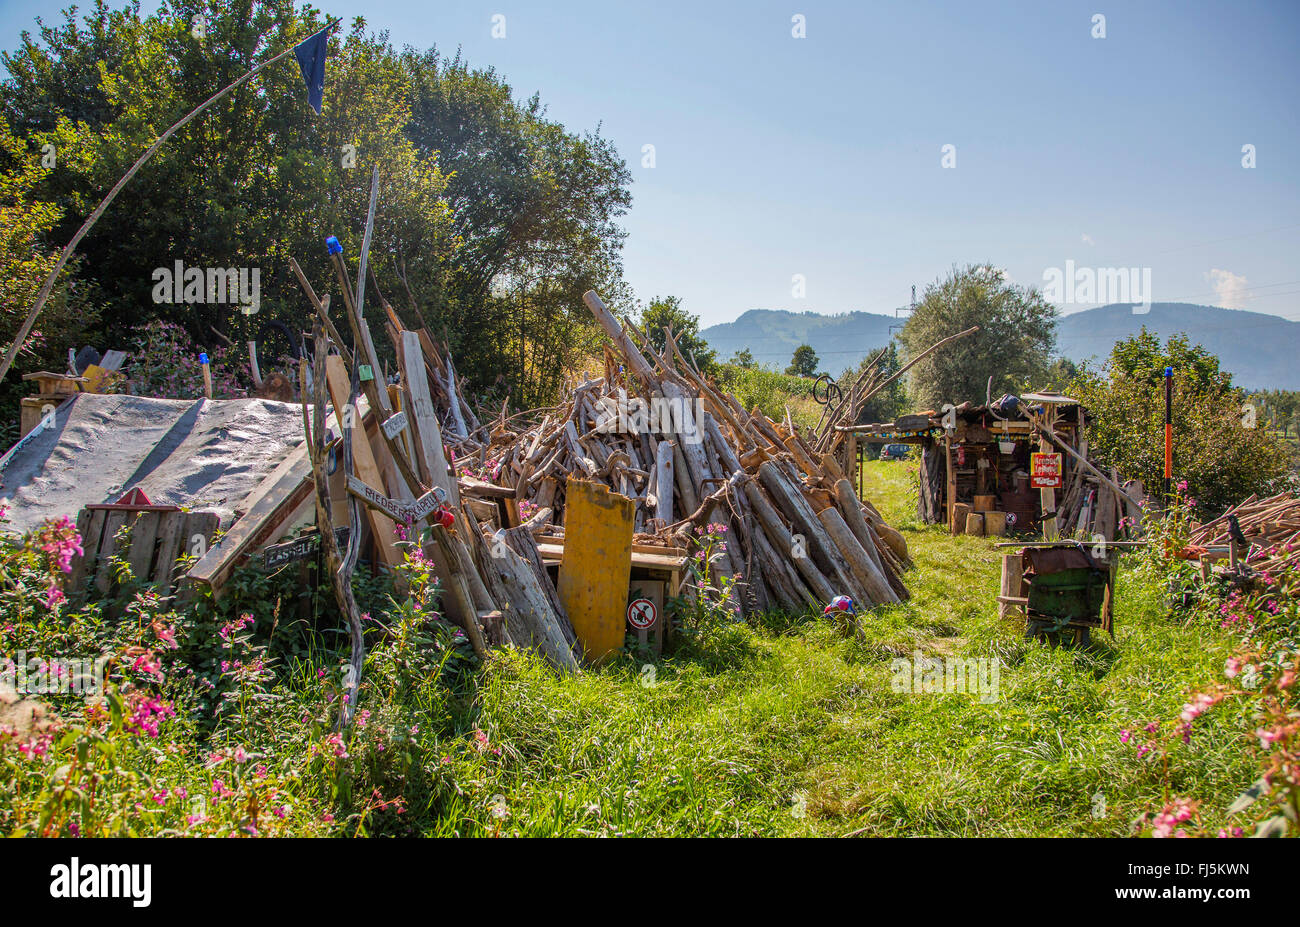 campground of the driftwood collectors at the Inn, Austria, Tyrol Stock Photo